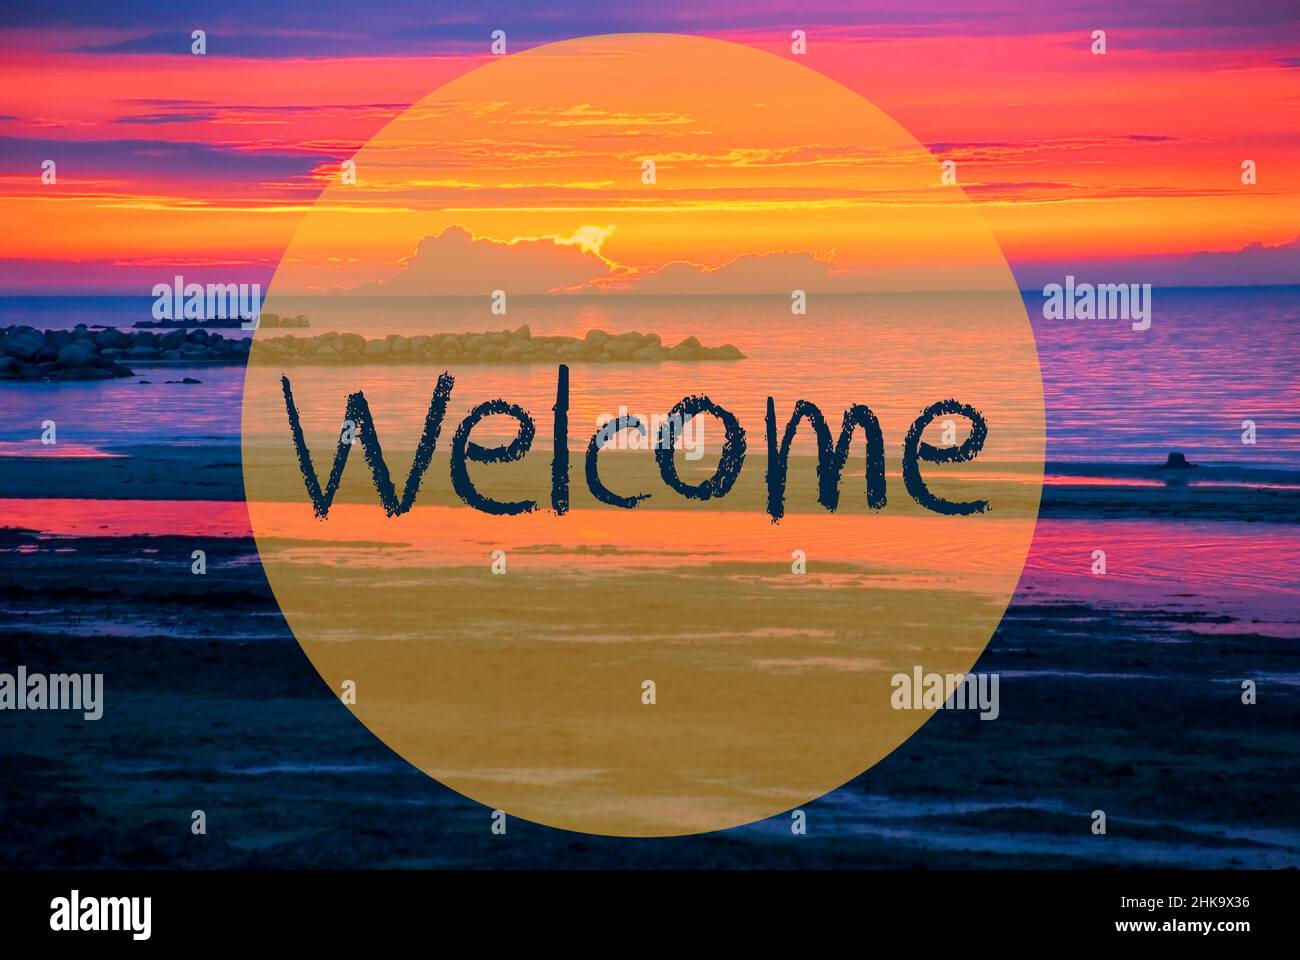 English Text Welcome. Romantic Sunset Or Sunrise At Sea Or Ocean In Sweden, Scandinavia In The Background Stock Photo